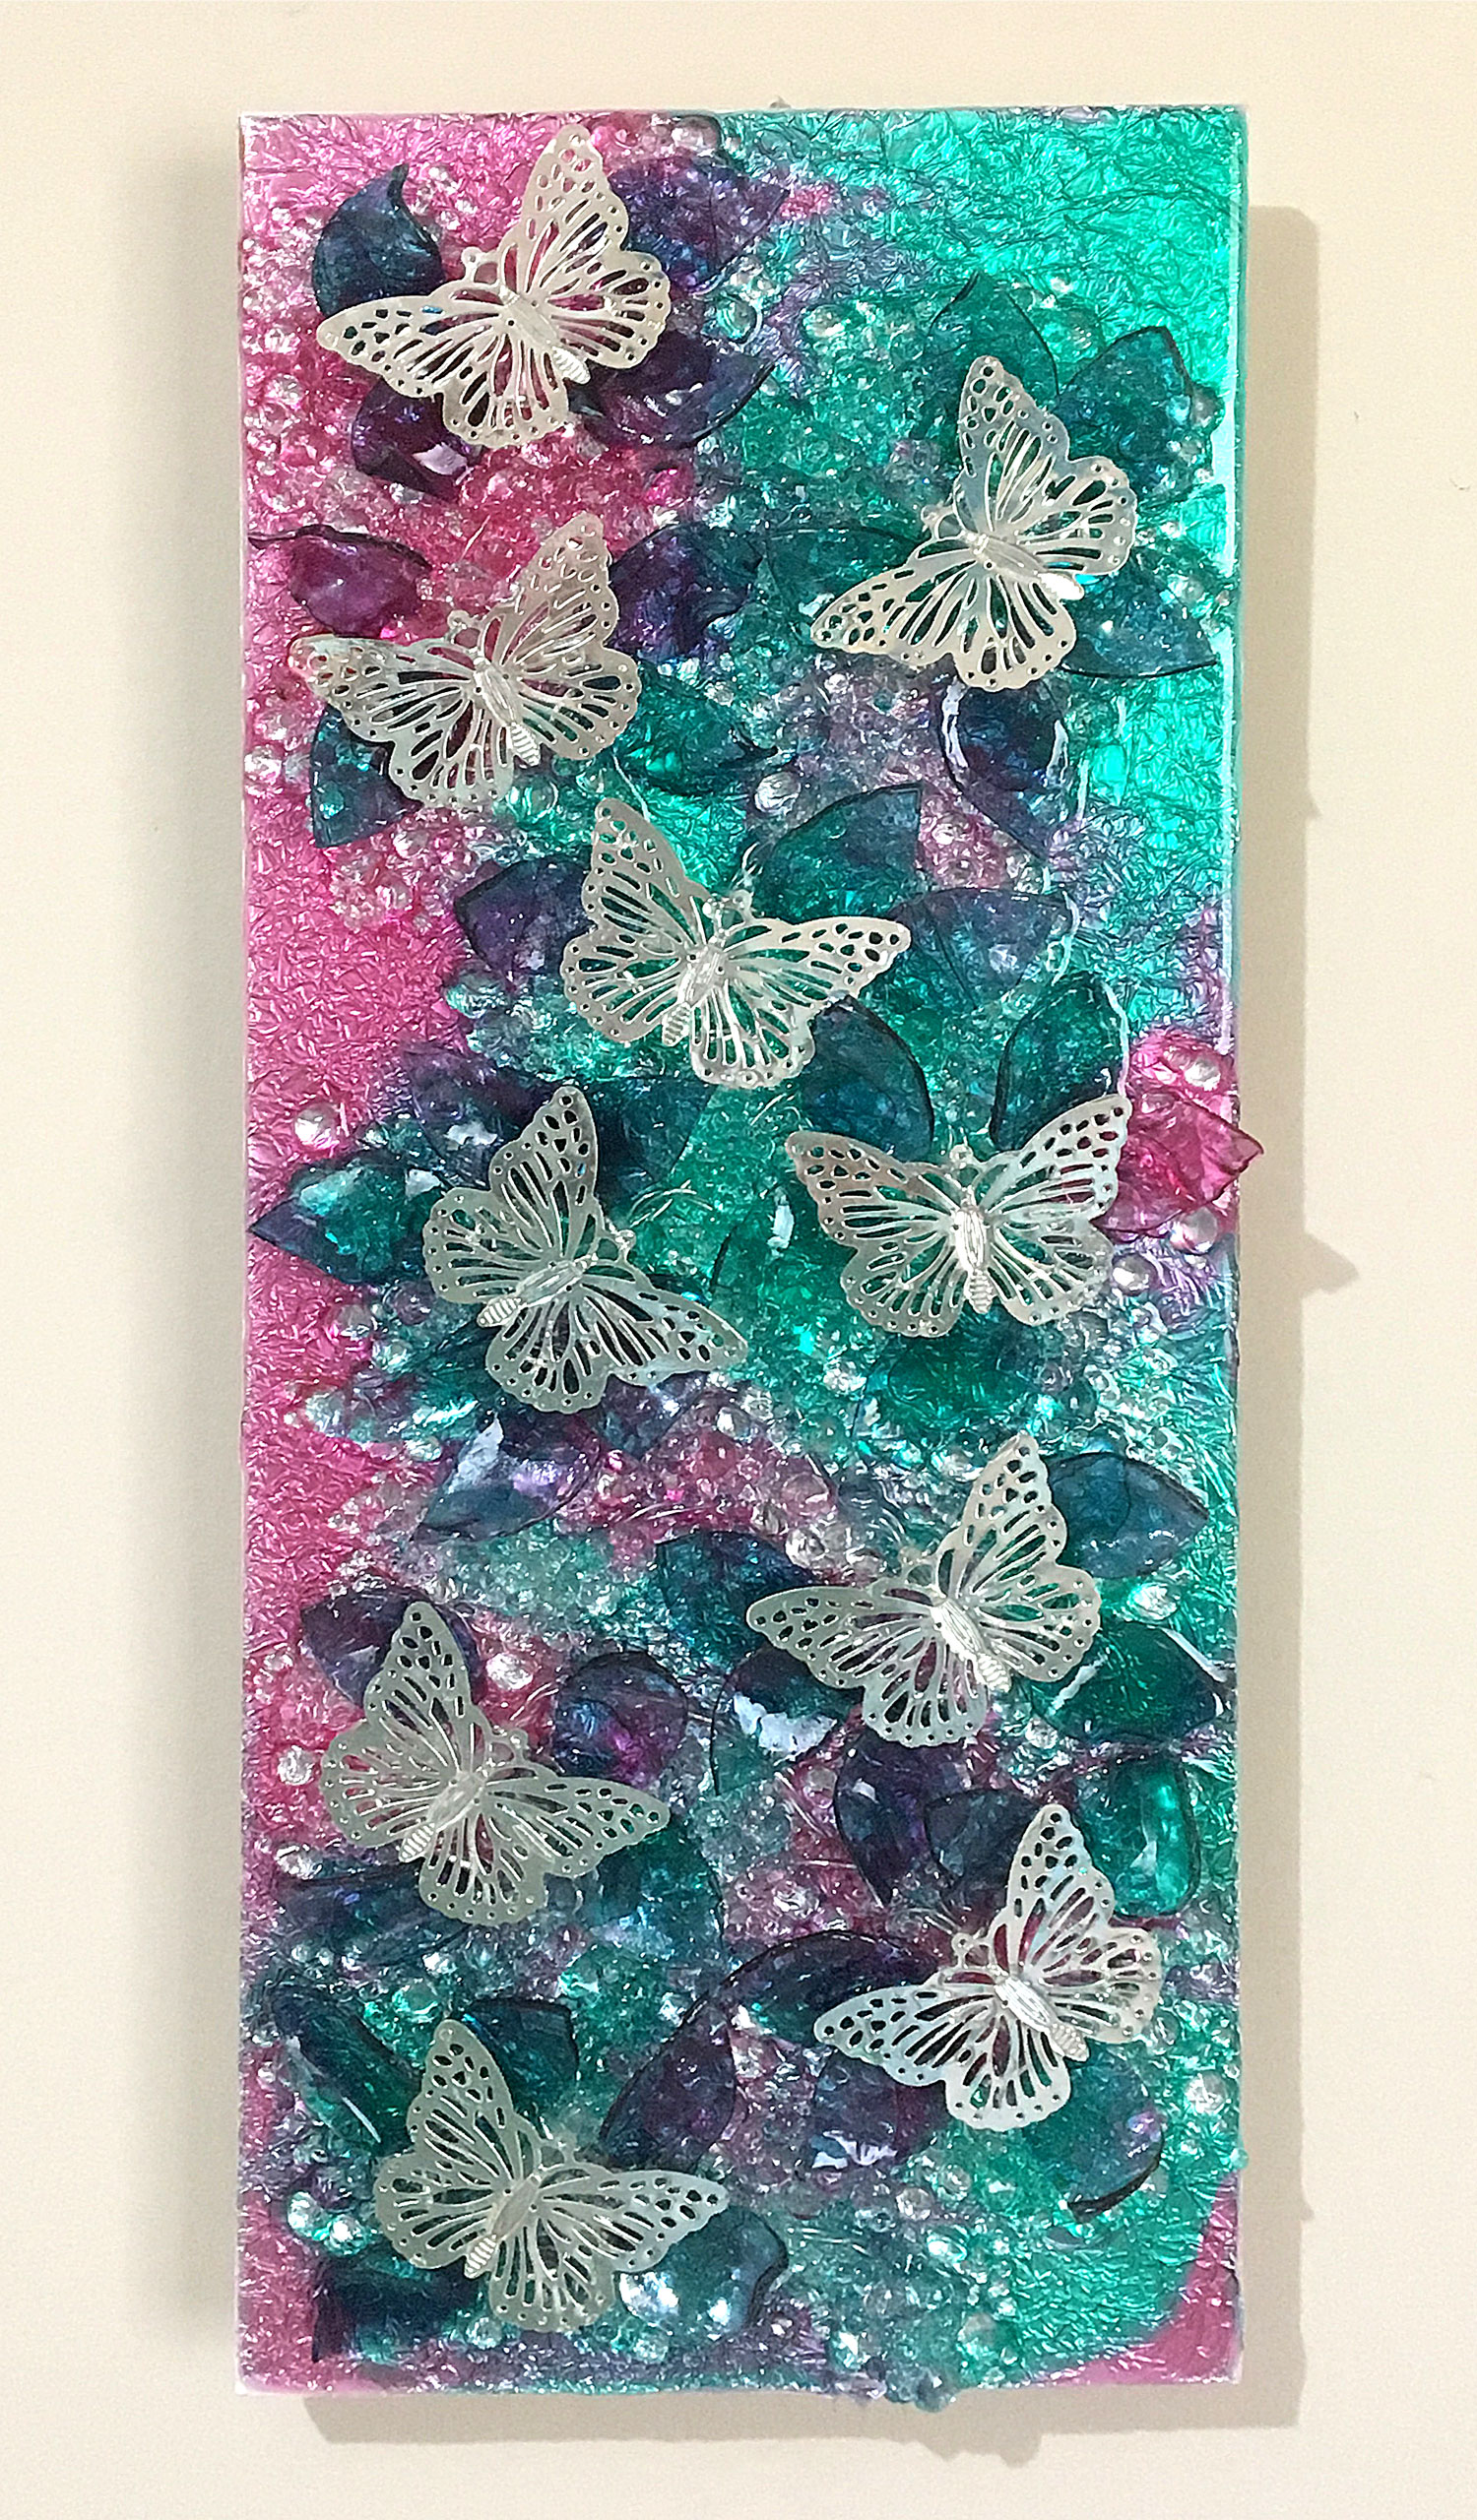 Fun project – Inserting lights into your resin art | Sue Findlay Designs